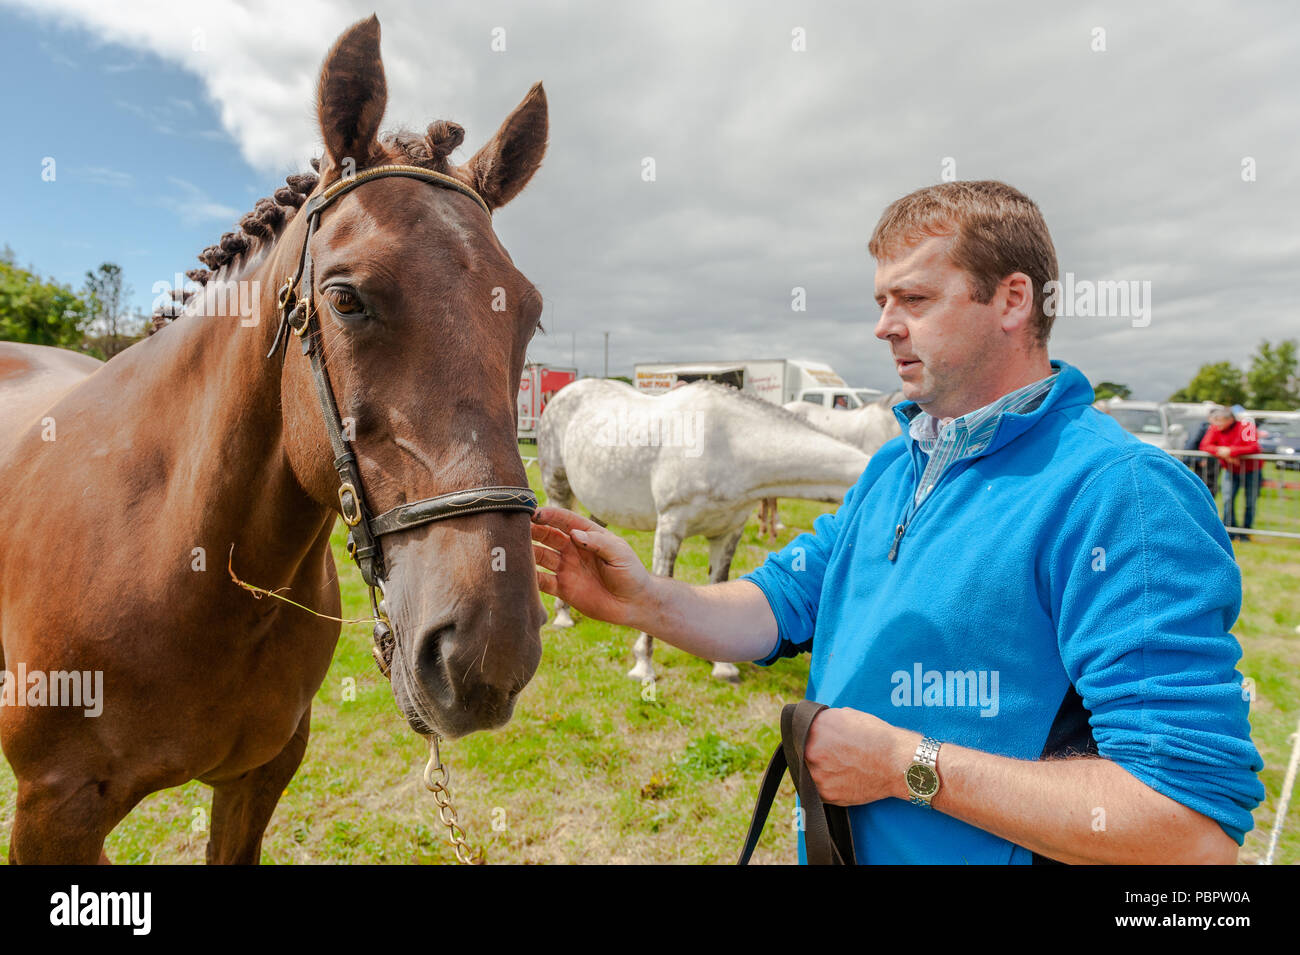 Schull, West Cork, Ireland. 29th July, 2018. Schull Agricultural Show is underway in blazing sunshine with hundreds of people attending. Patrick Cronin from Ballylickey showed his Irish Draught horse 'Lady Mary'. Credit: Andy Gibson/Alamy Live News. Stock Photo